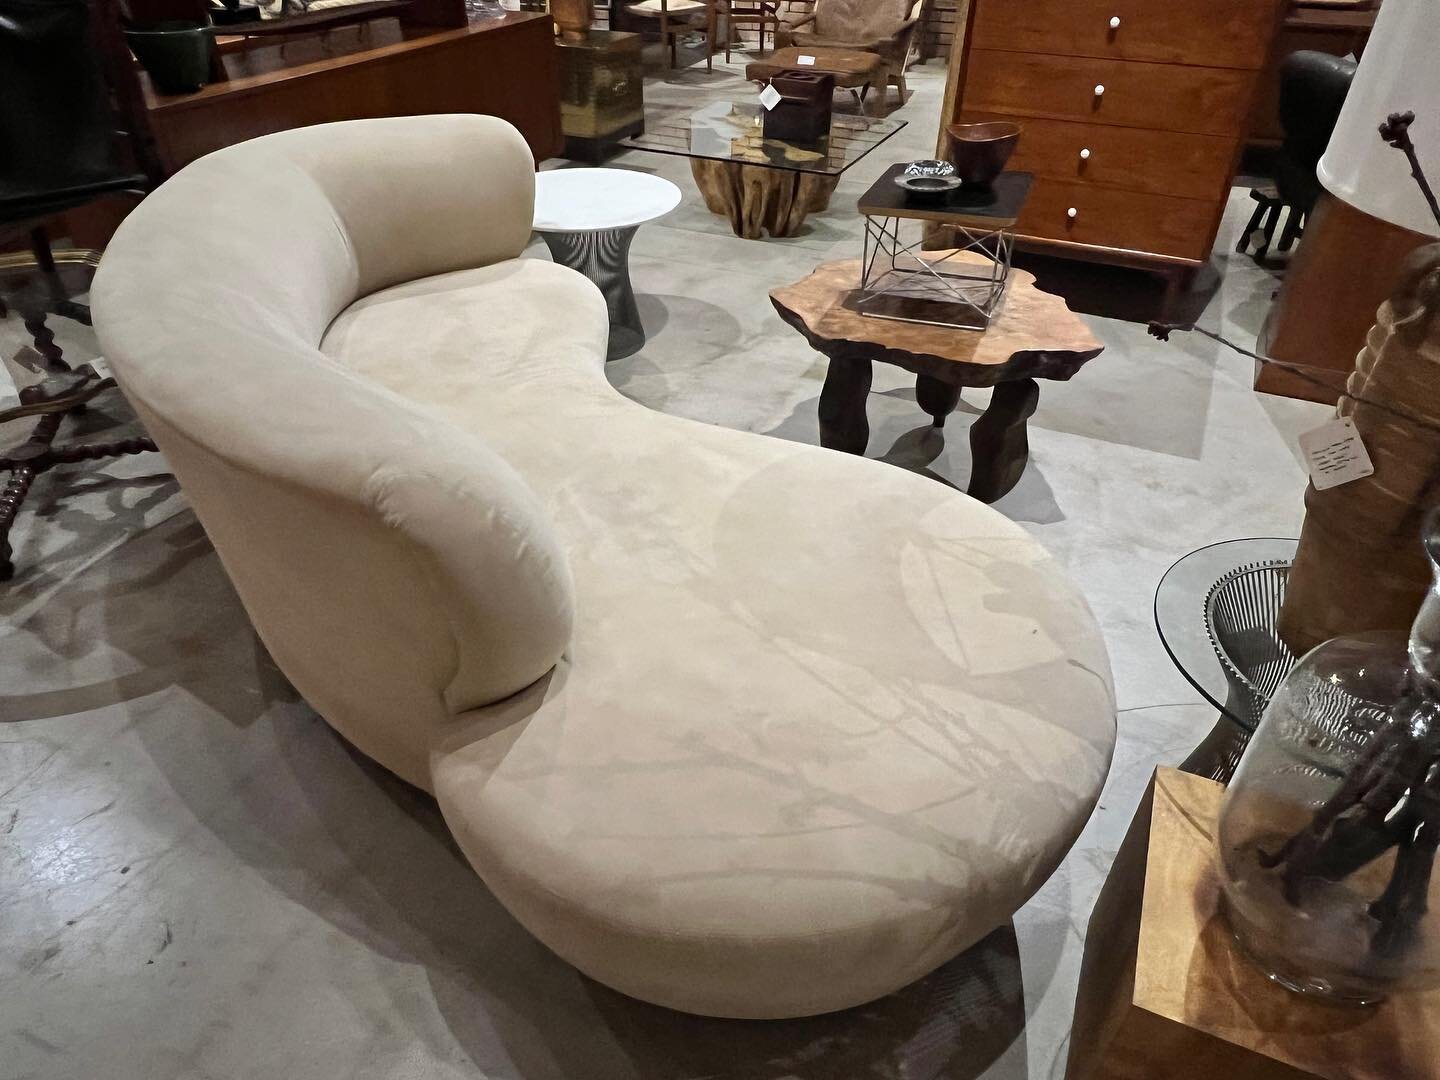 Available
.
.
1980s Weiman Preview serpentine sofa attributed to Vladimir Kagan now in the shop. We love the postmodern fluidity of form grounded by the no-nonsense, neutral ultra suede upholstery. We encourage stopping in for a test drive. ☁️ 
.
.
M